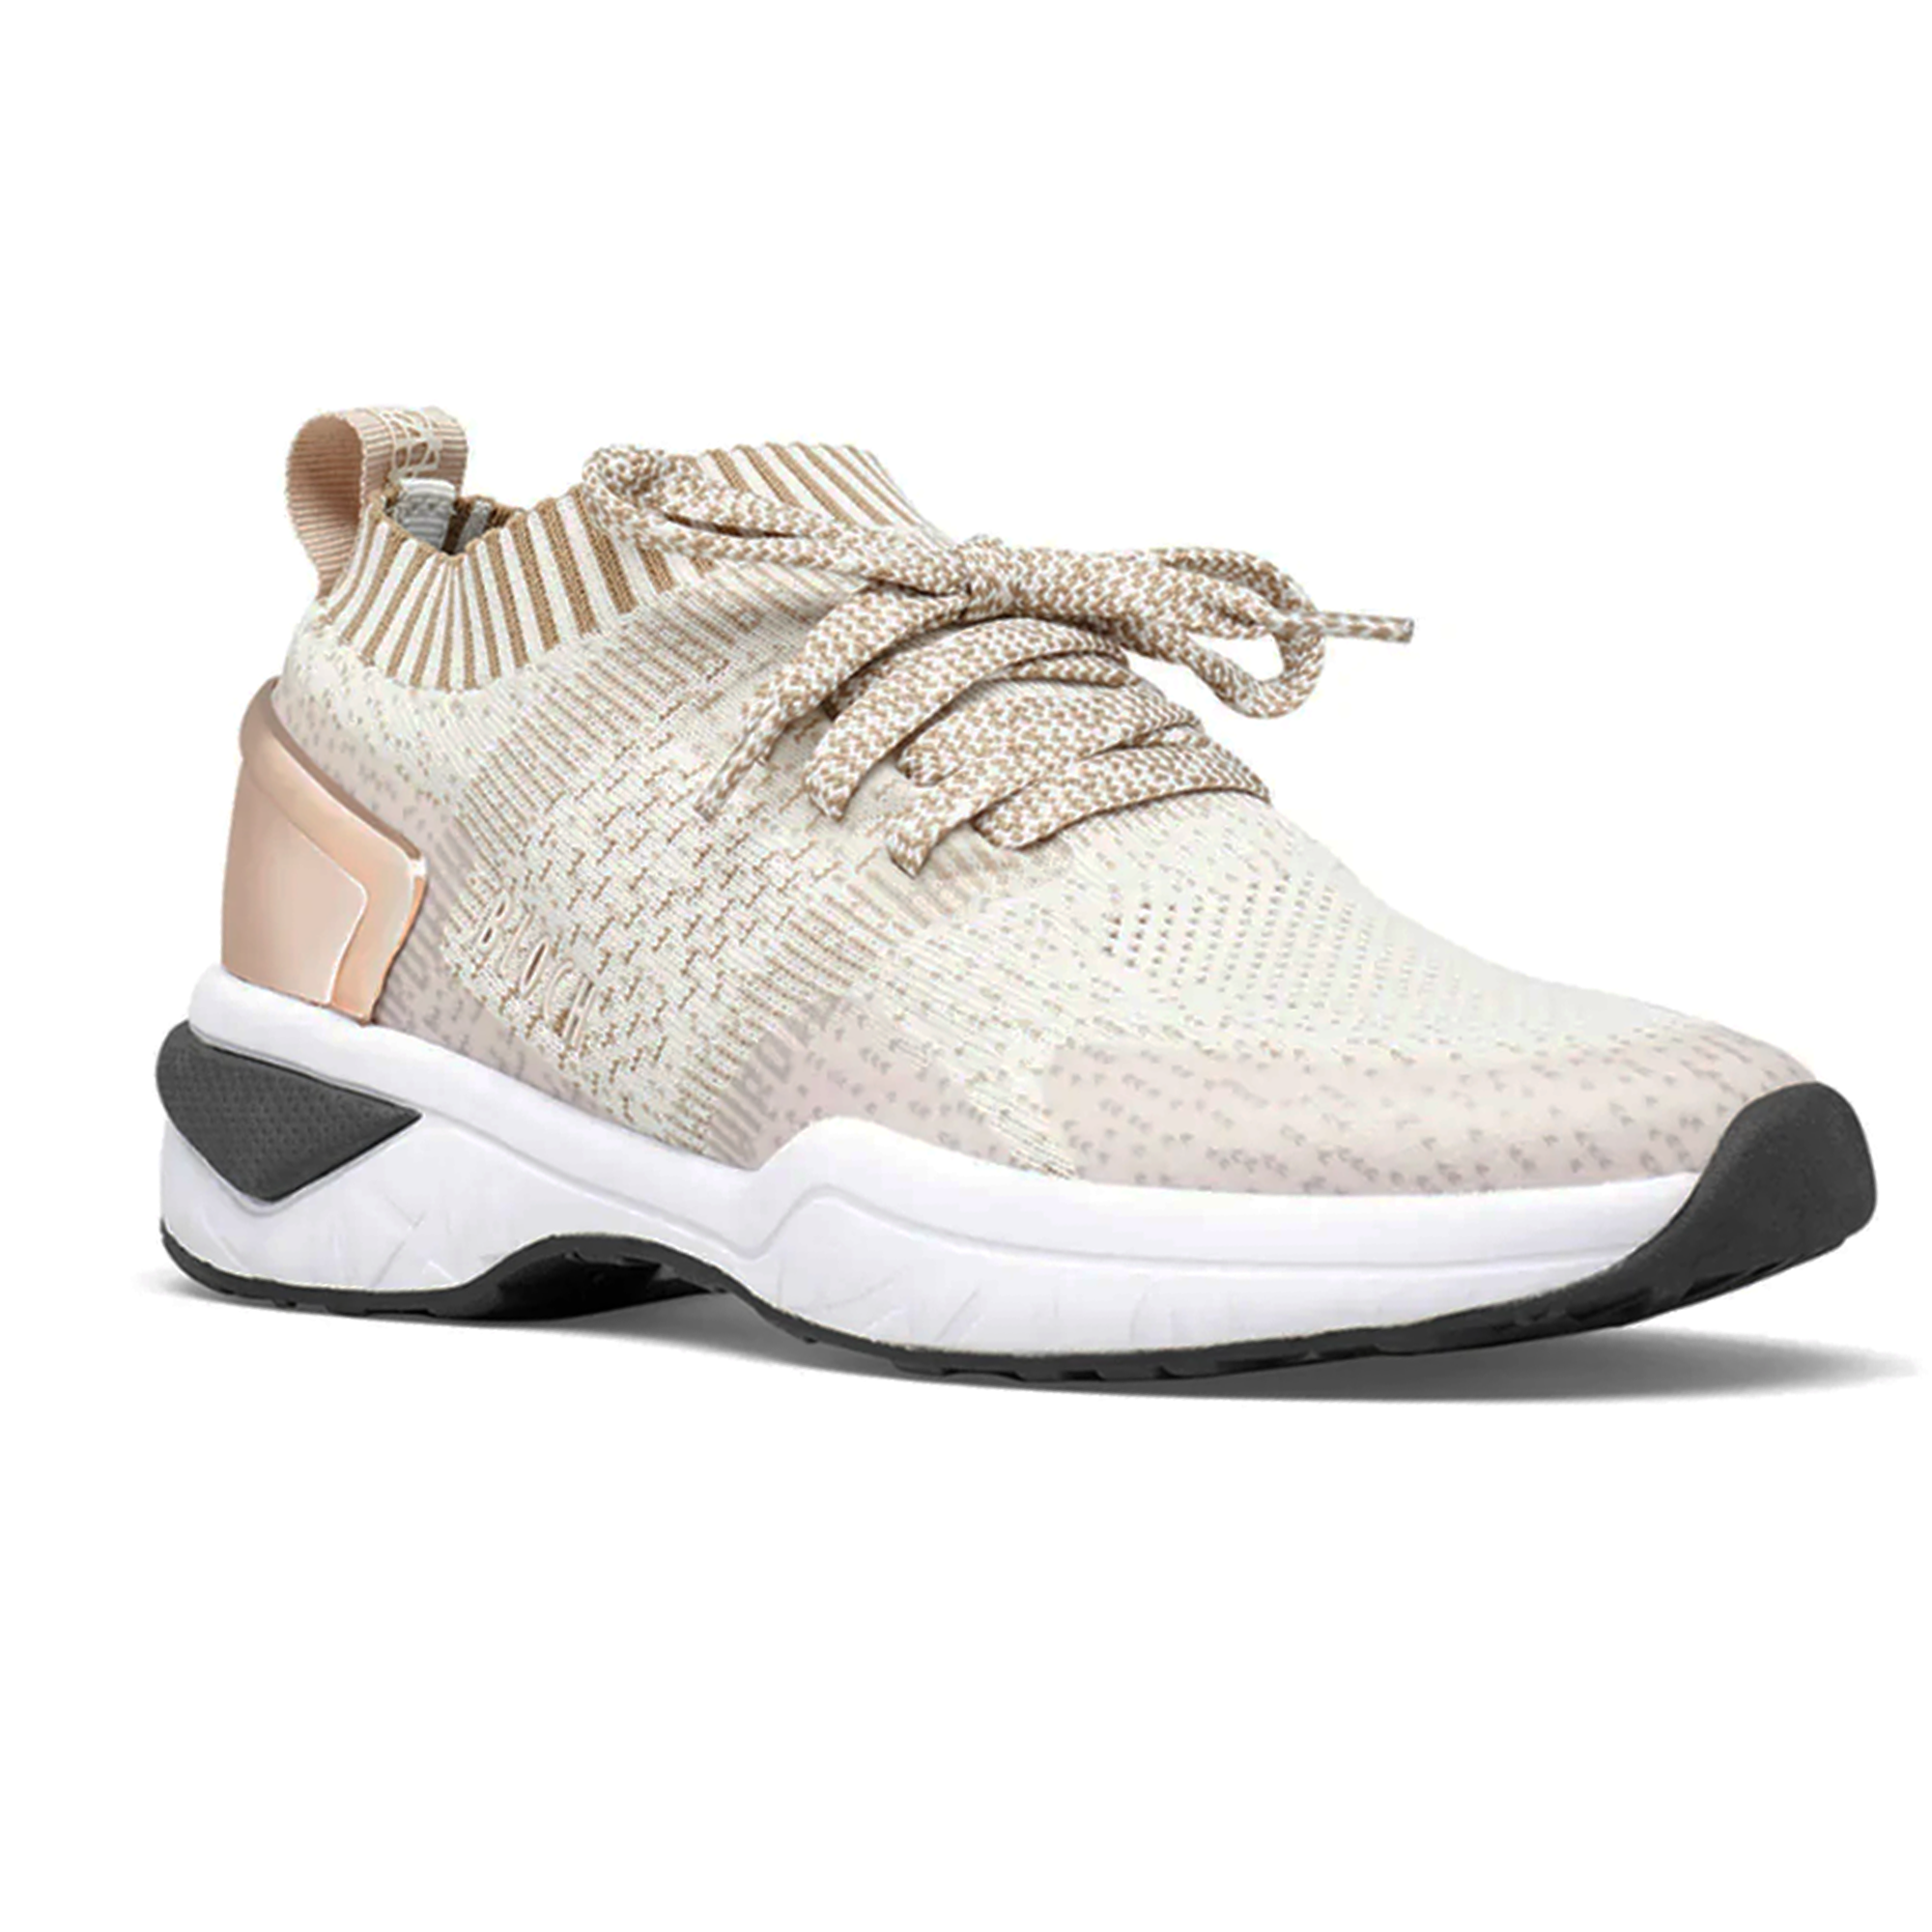 Bloch Alcyone Seamless Knit Lifestyle Dance Sneakers - S0929L